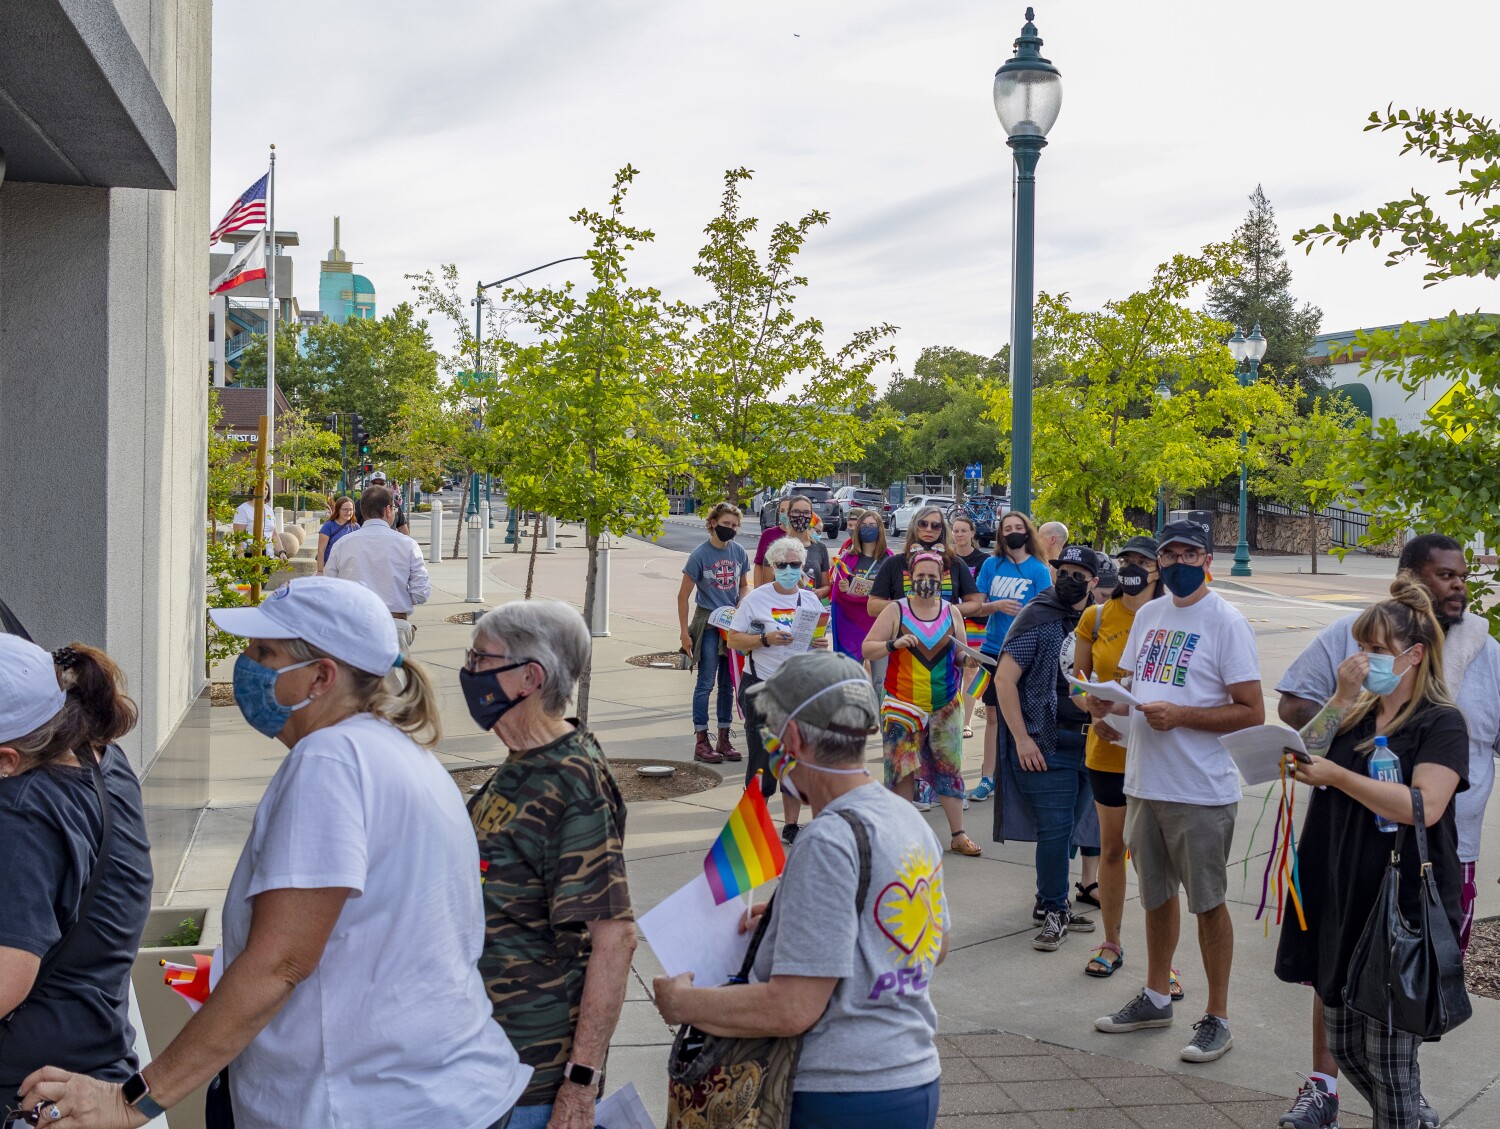 Roseville residents asked to fly the rainbow Pride flag at City Hall. Council members said no